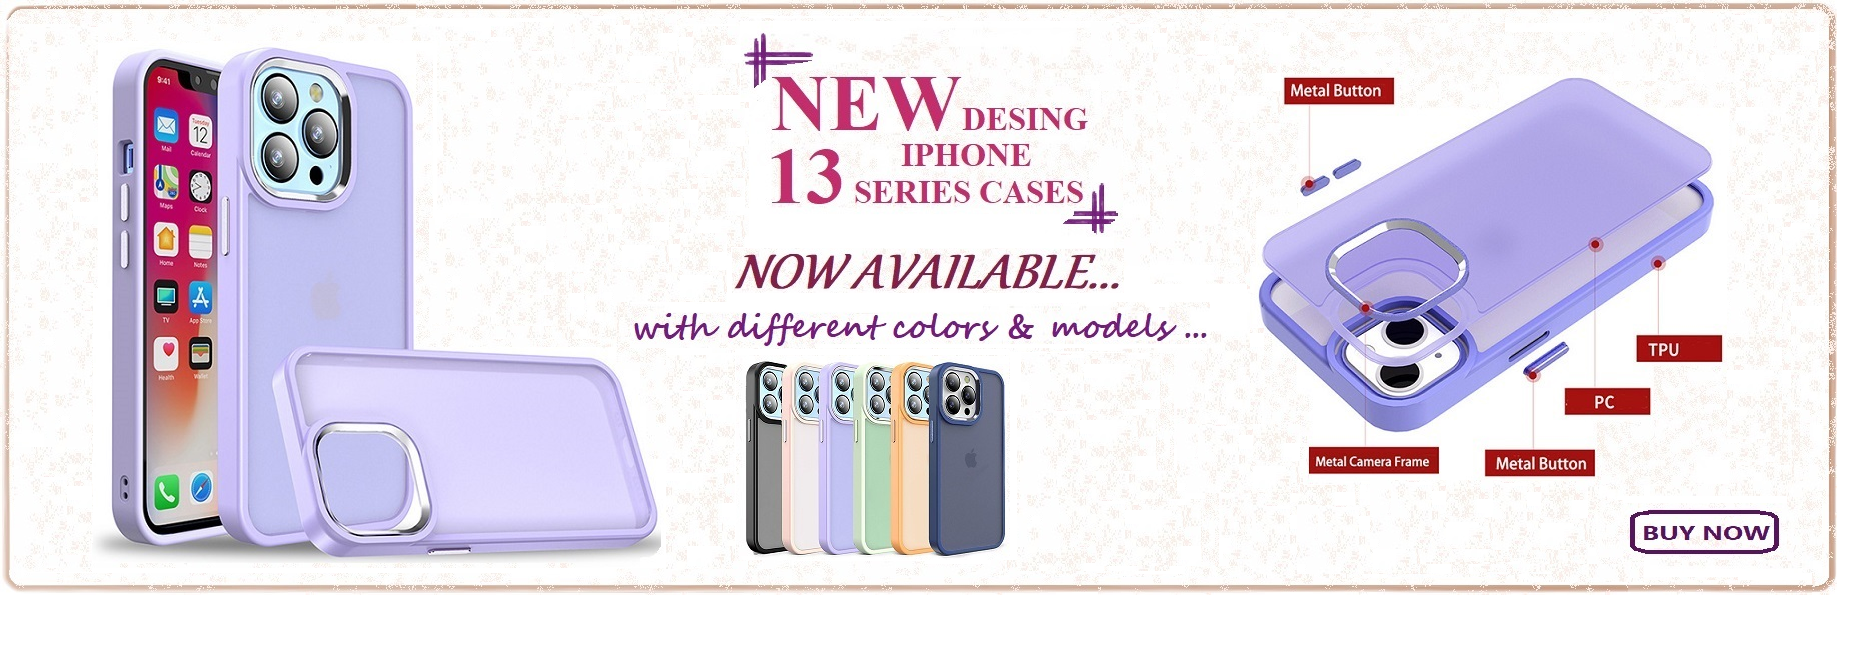 NEW IPHONE 13 MATTE FINISH CASES